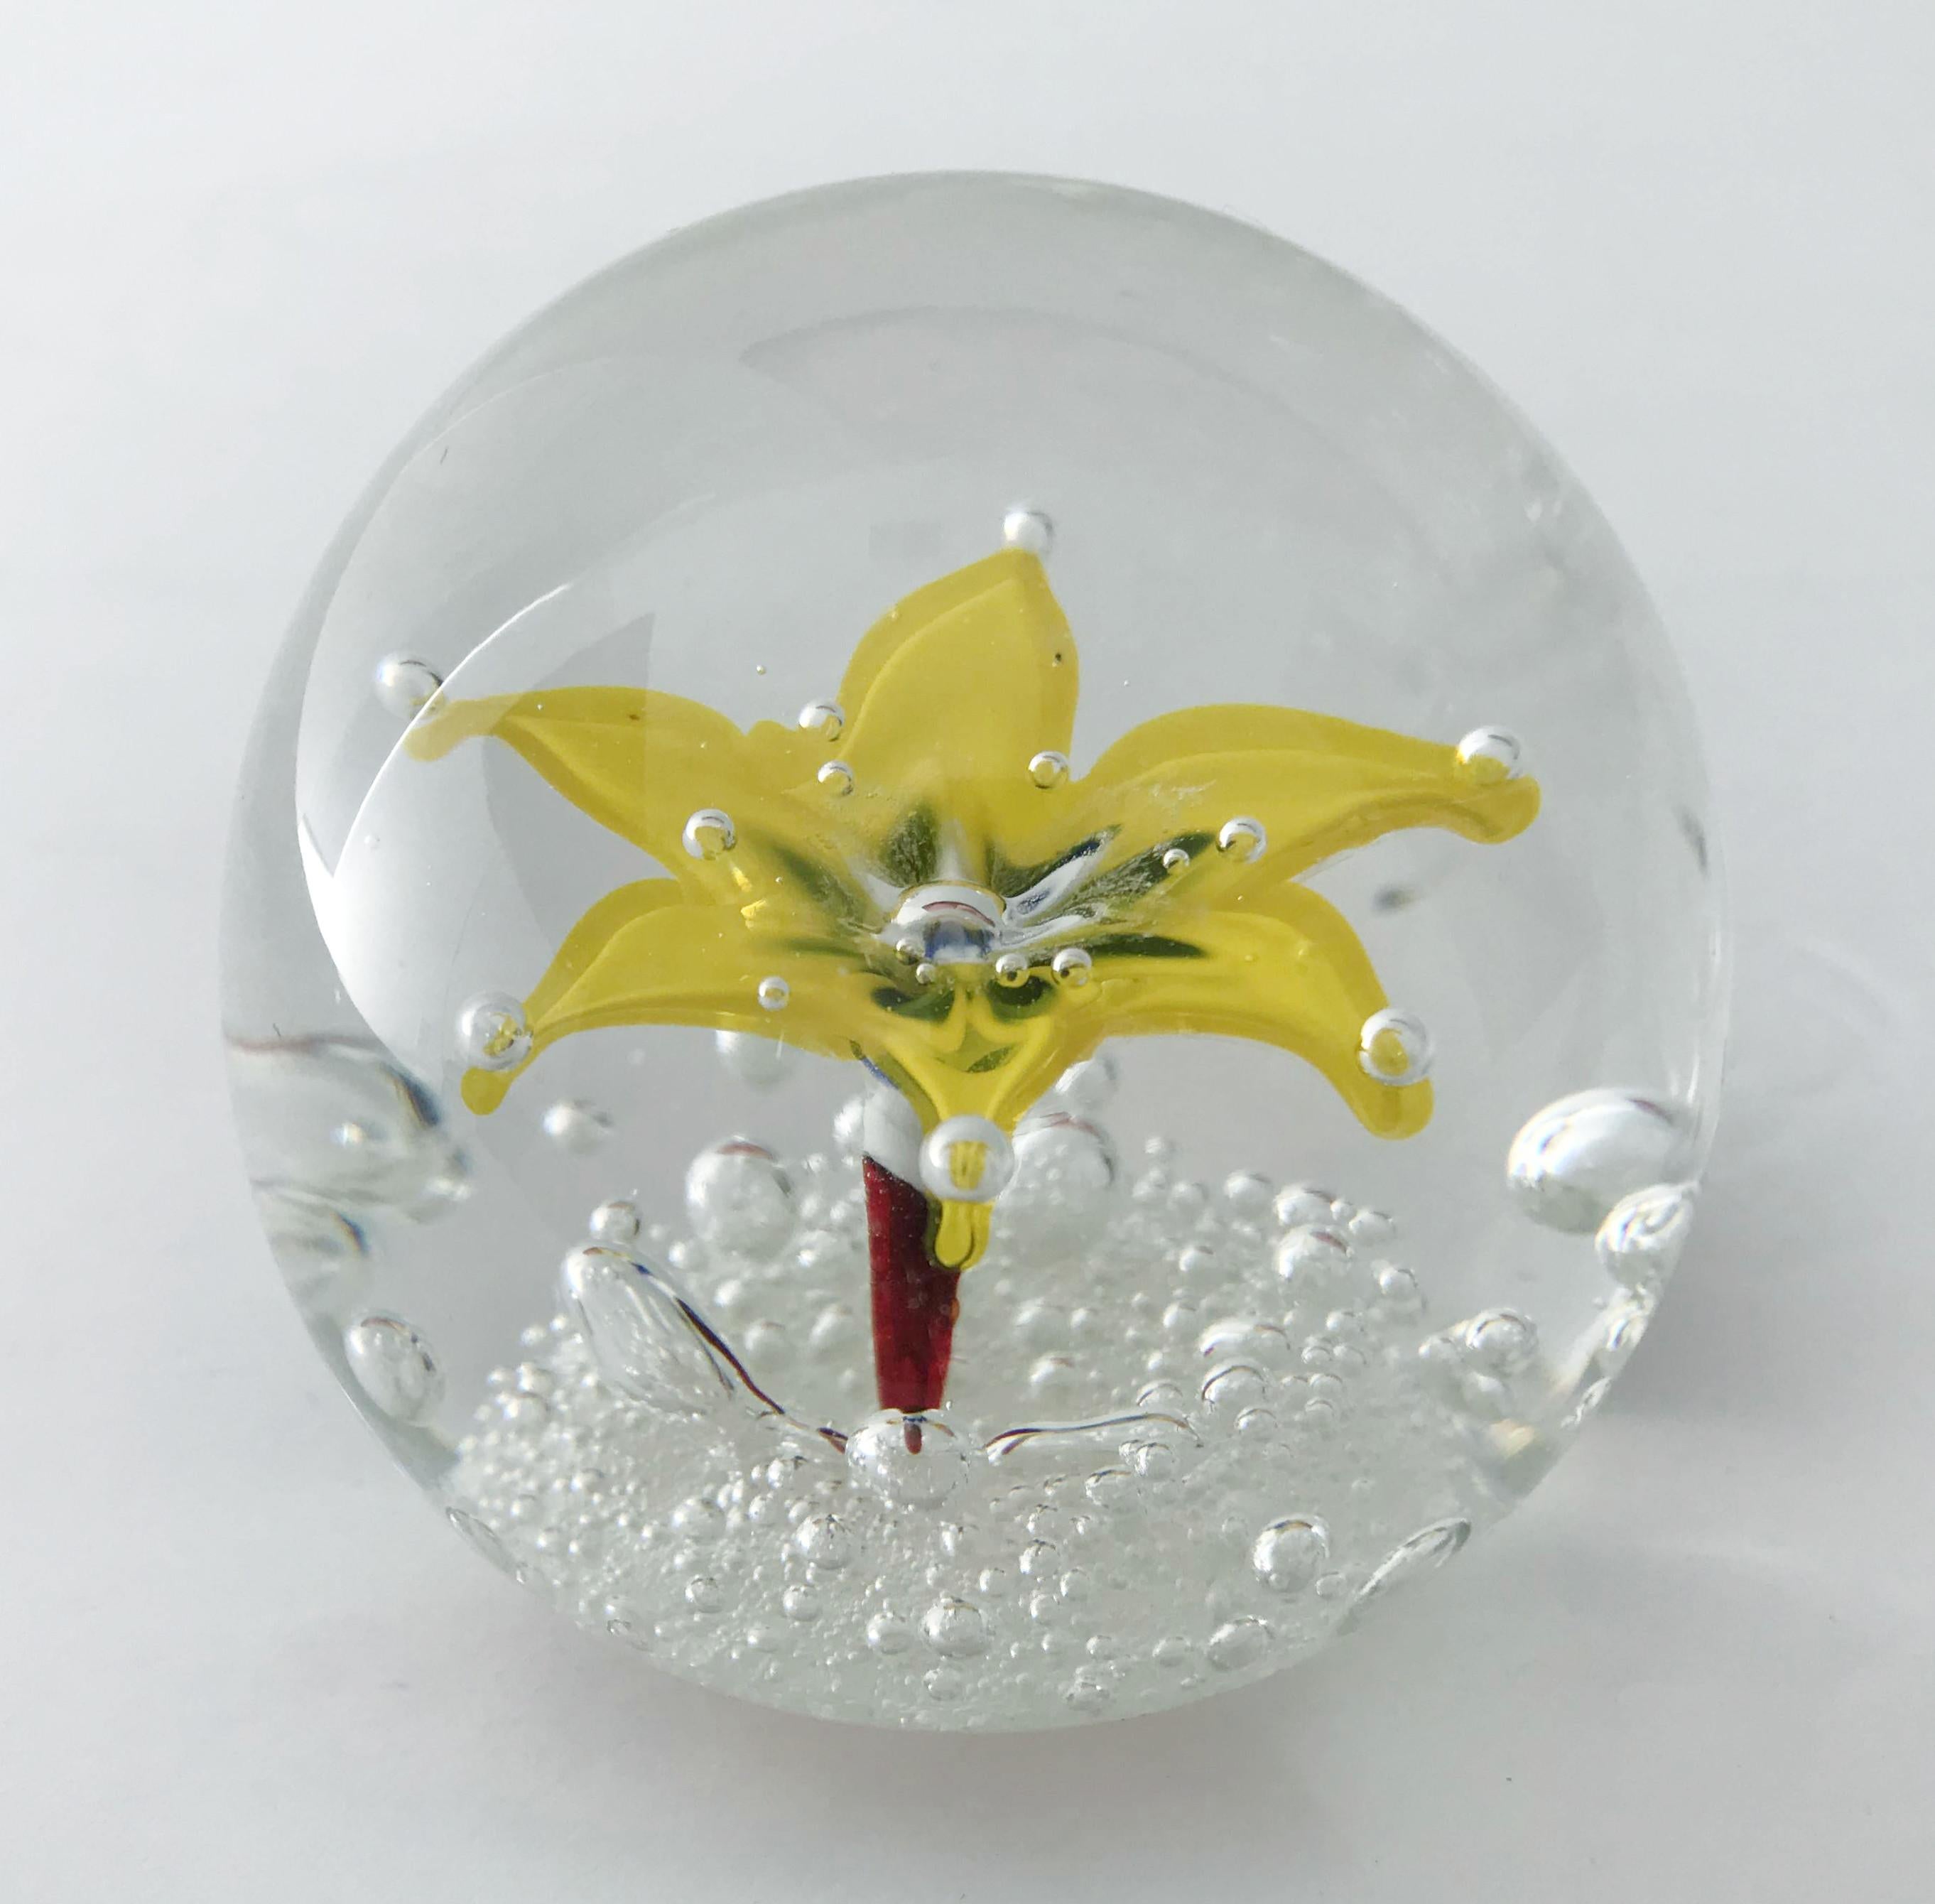 Vintage Italian hand blown Murano glass paperweight with a large yellow flower and small bubbles using bollicine technique by Ferro & Lazzarini, made in Italy, circa 1960s
Original sticker on the bottom
Measures: diameter 2.75 inches, height 2.5